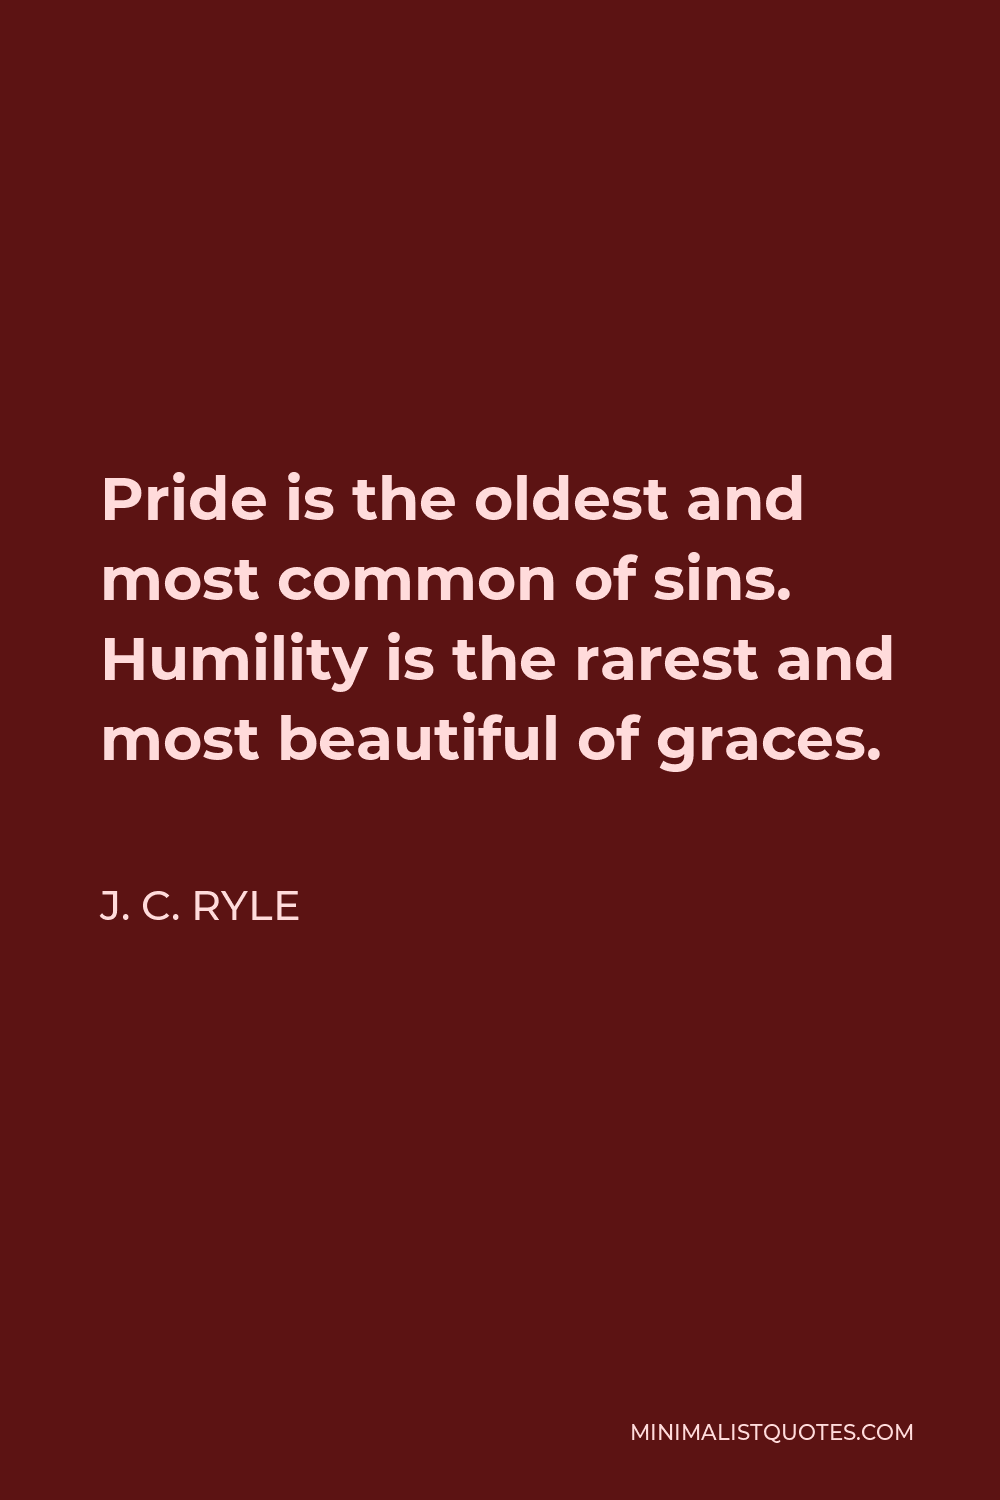 J. C. Ryle Quote - Pride is the oldest and most common of sins. Humility is the rarest and most beautiful of graces.